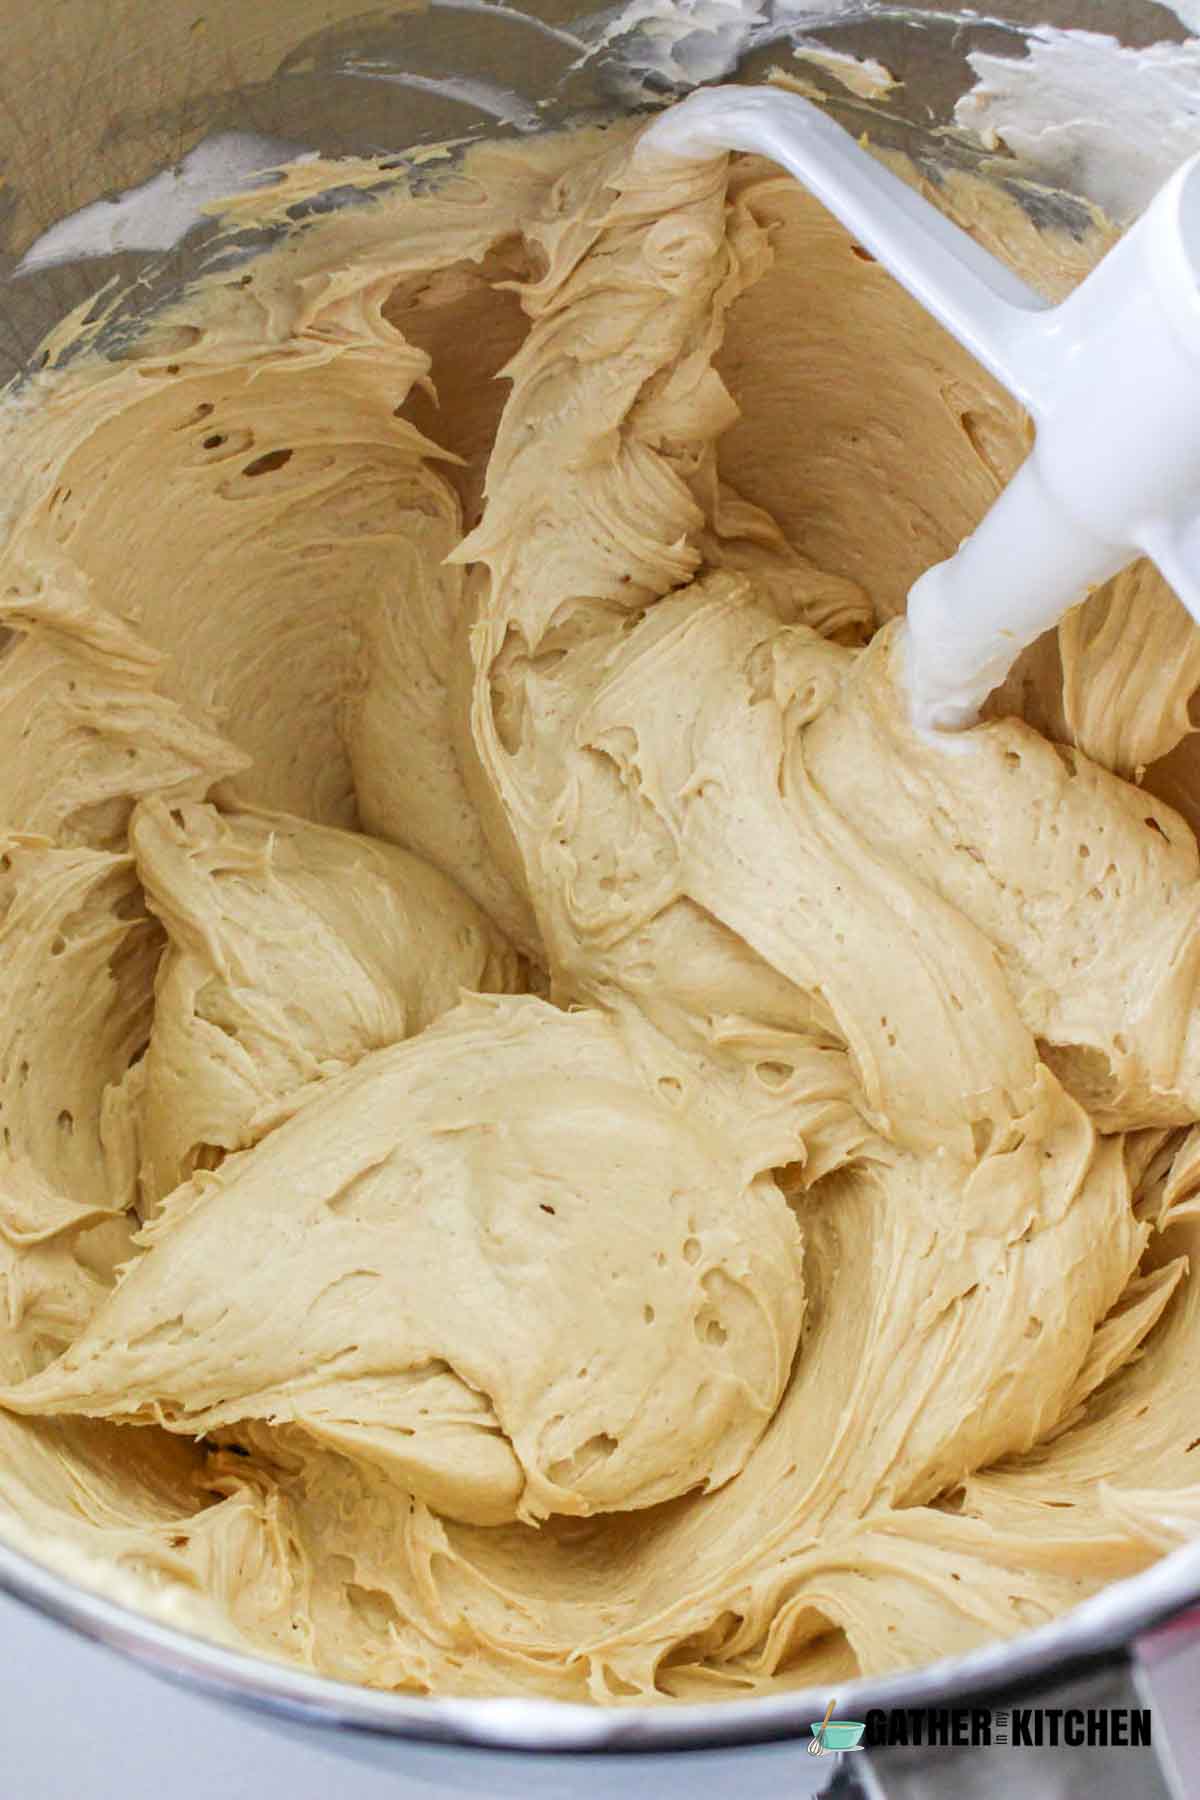 Whipped topping mixed into peanut butter mixture.